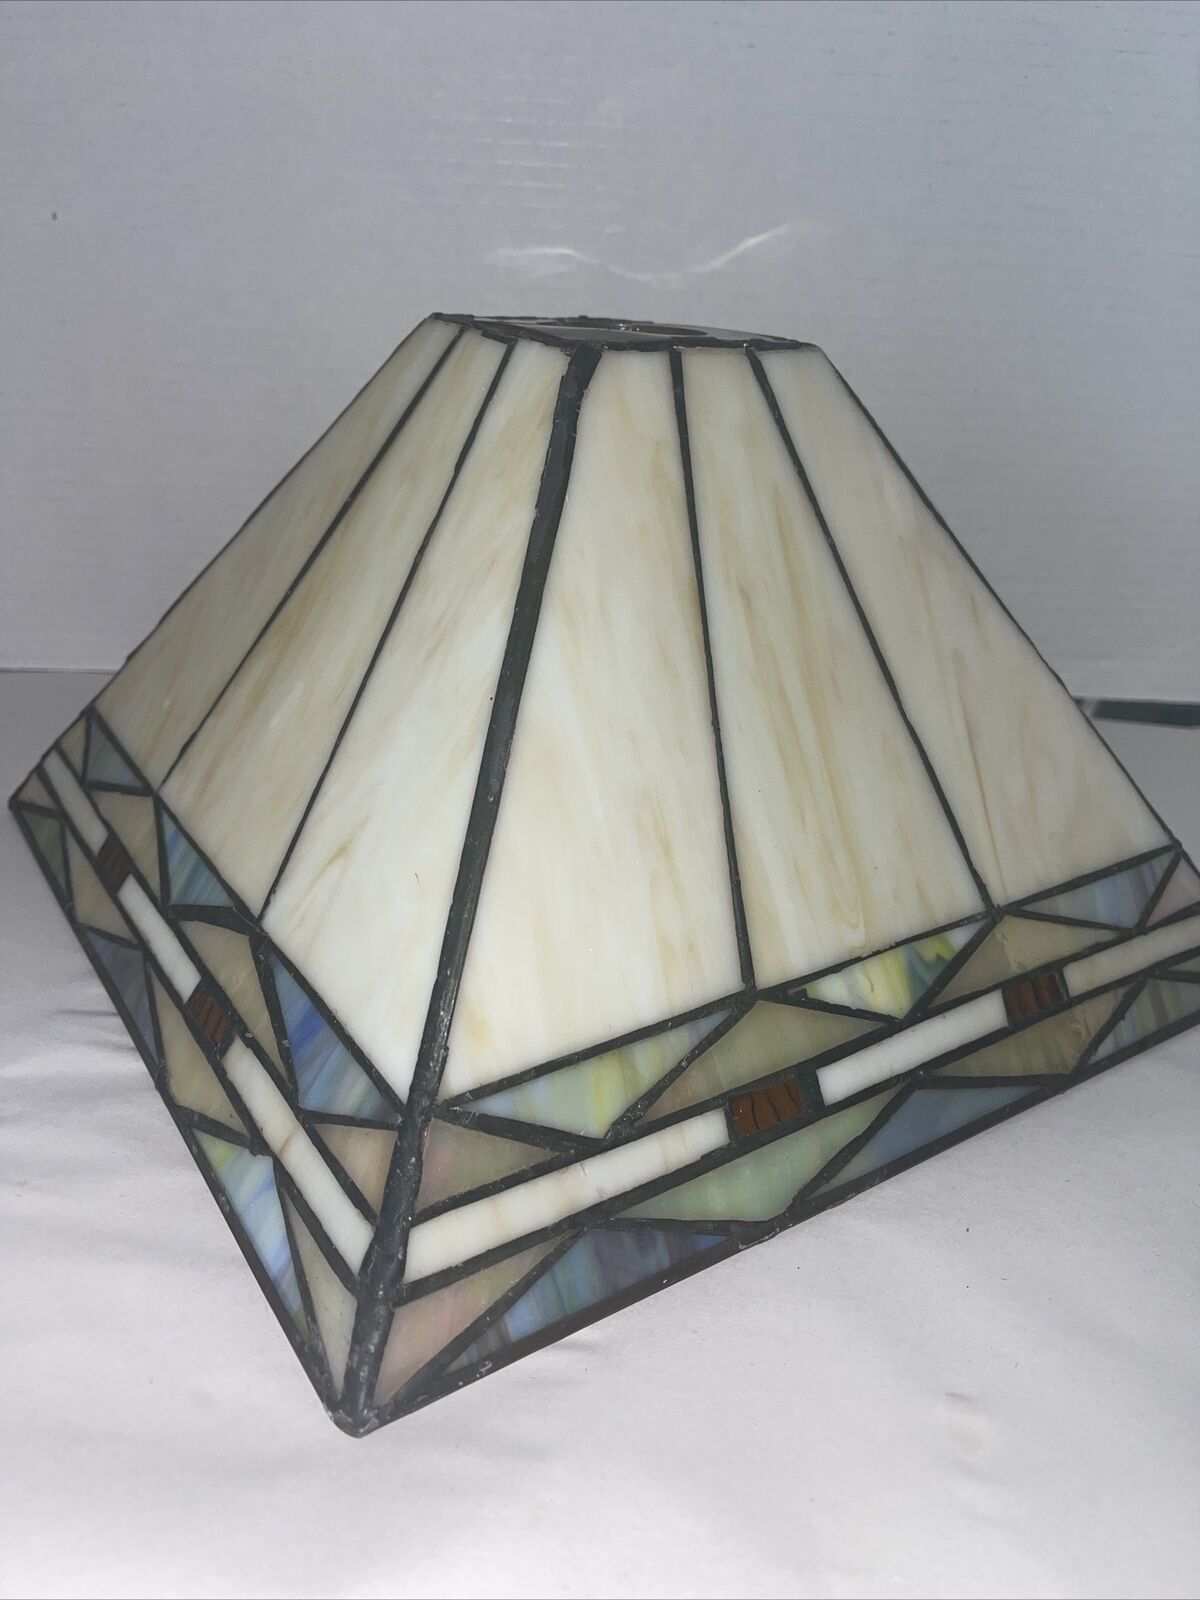 Stained Slag Glass Lamp Mission Frank Lloyd Wright Style Shade 10.5x10.5x6.5”